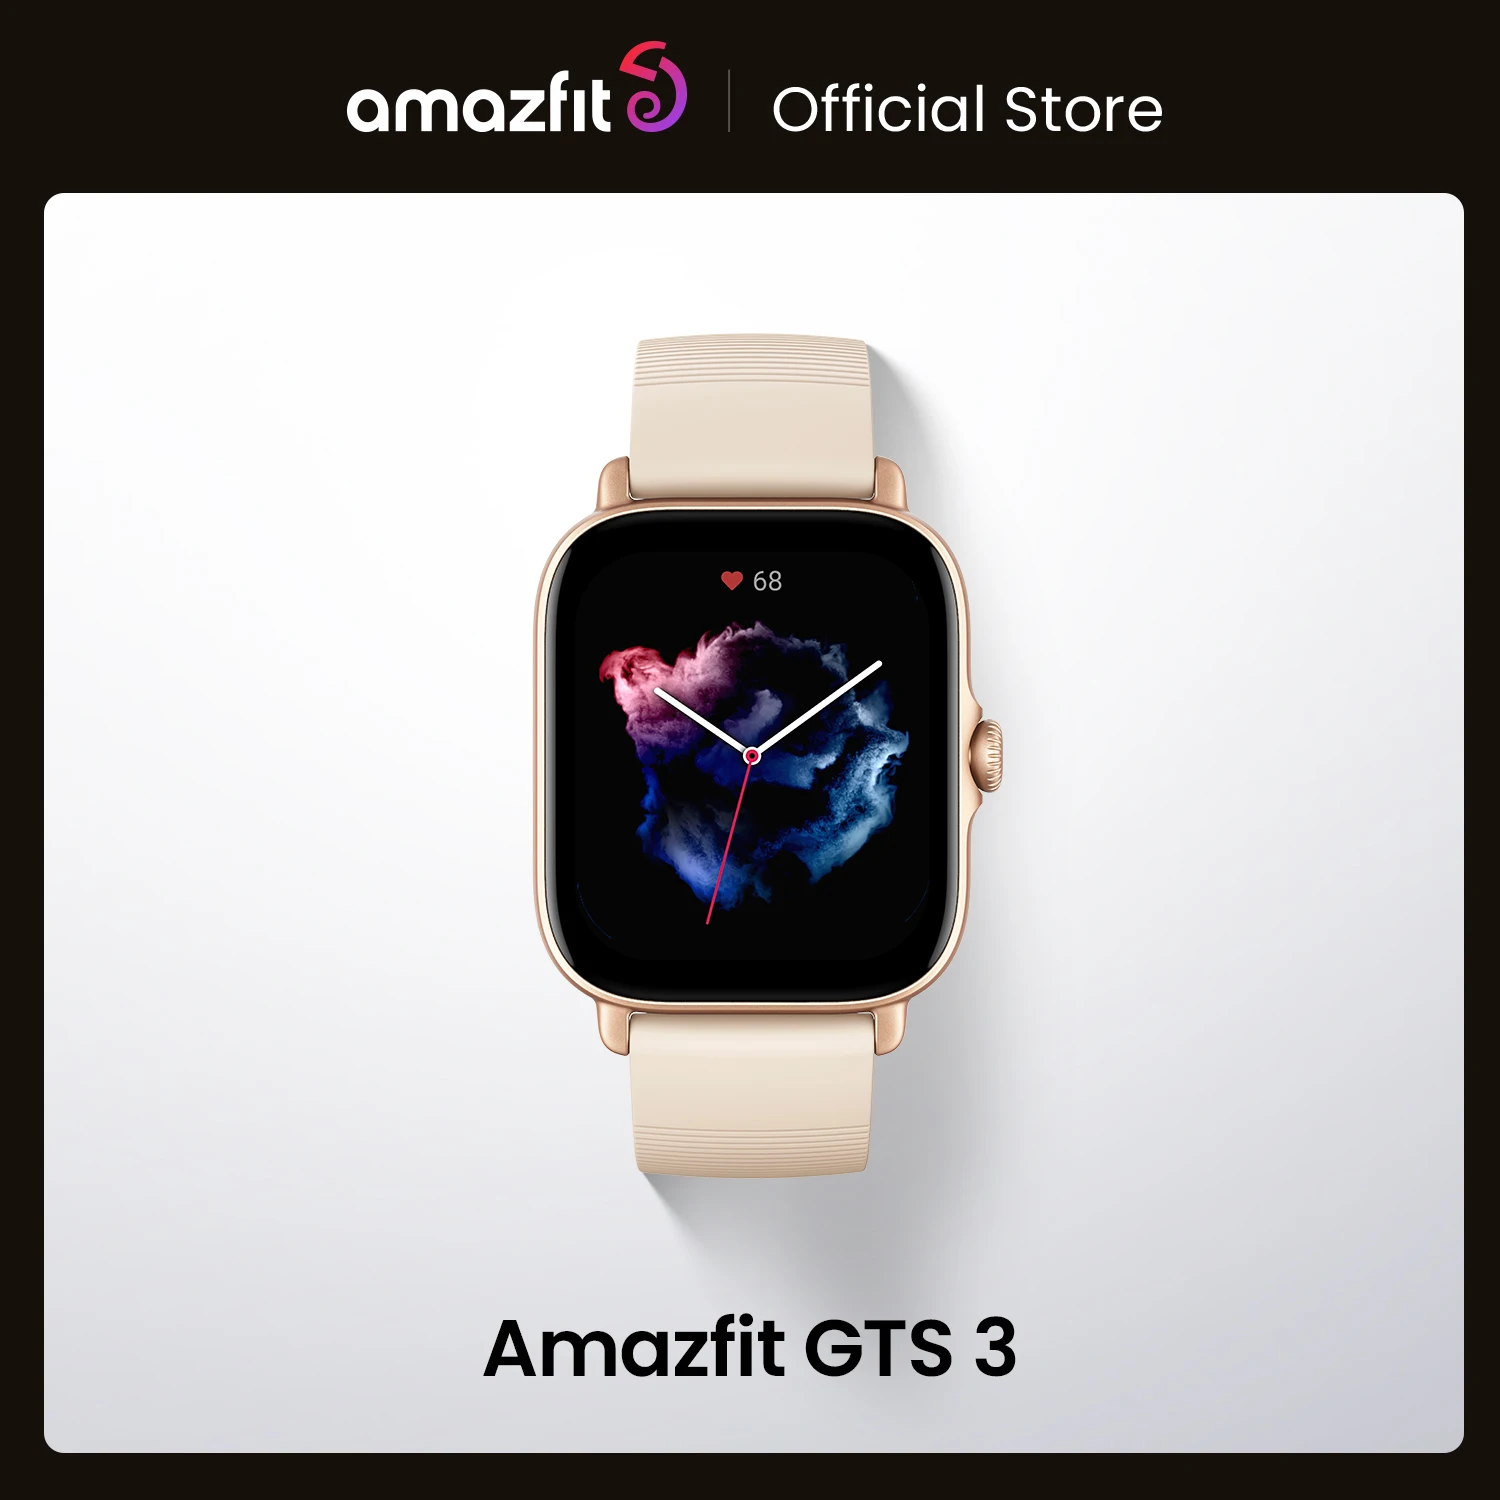 

2022Global Version Amazfit GTS 3 GTS-3 GTS3 Zepp OS Smartwatch AMOLED Display 5 ATM with Alexa Built in Smart watch for Andriod